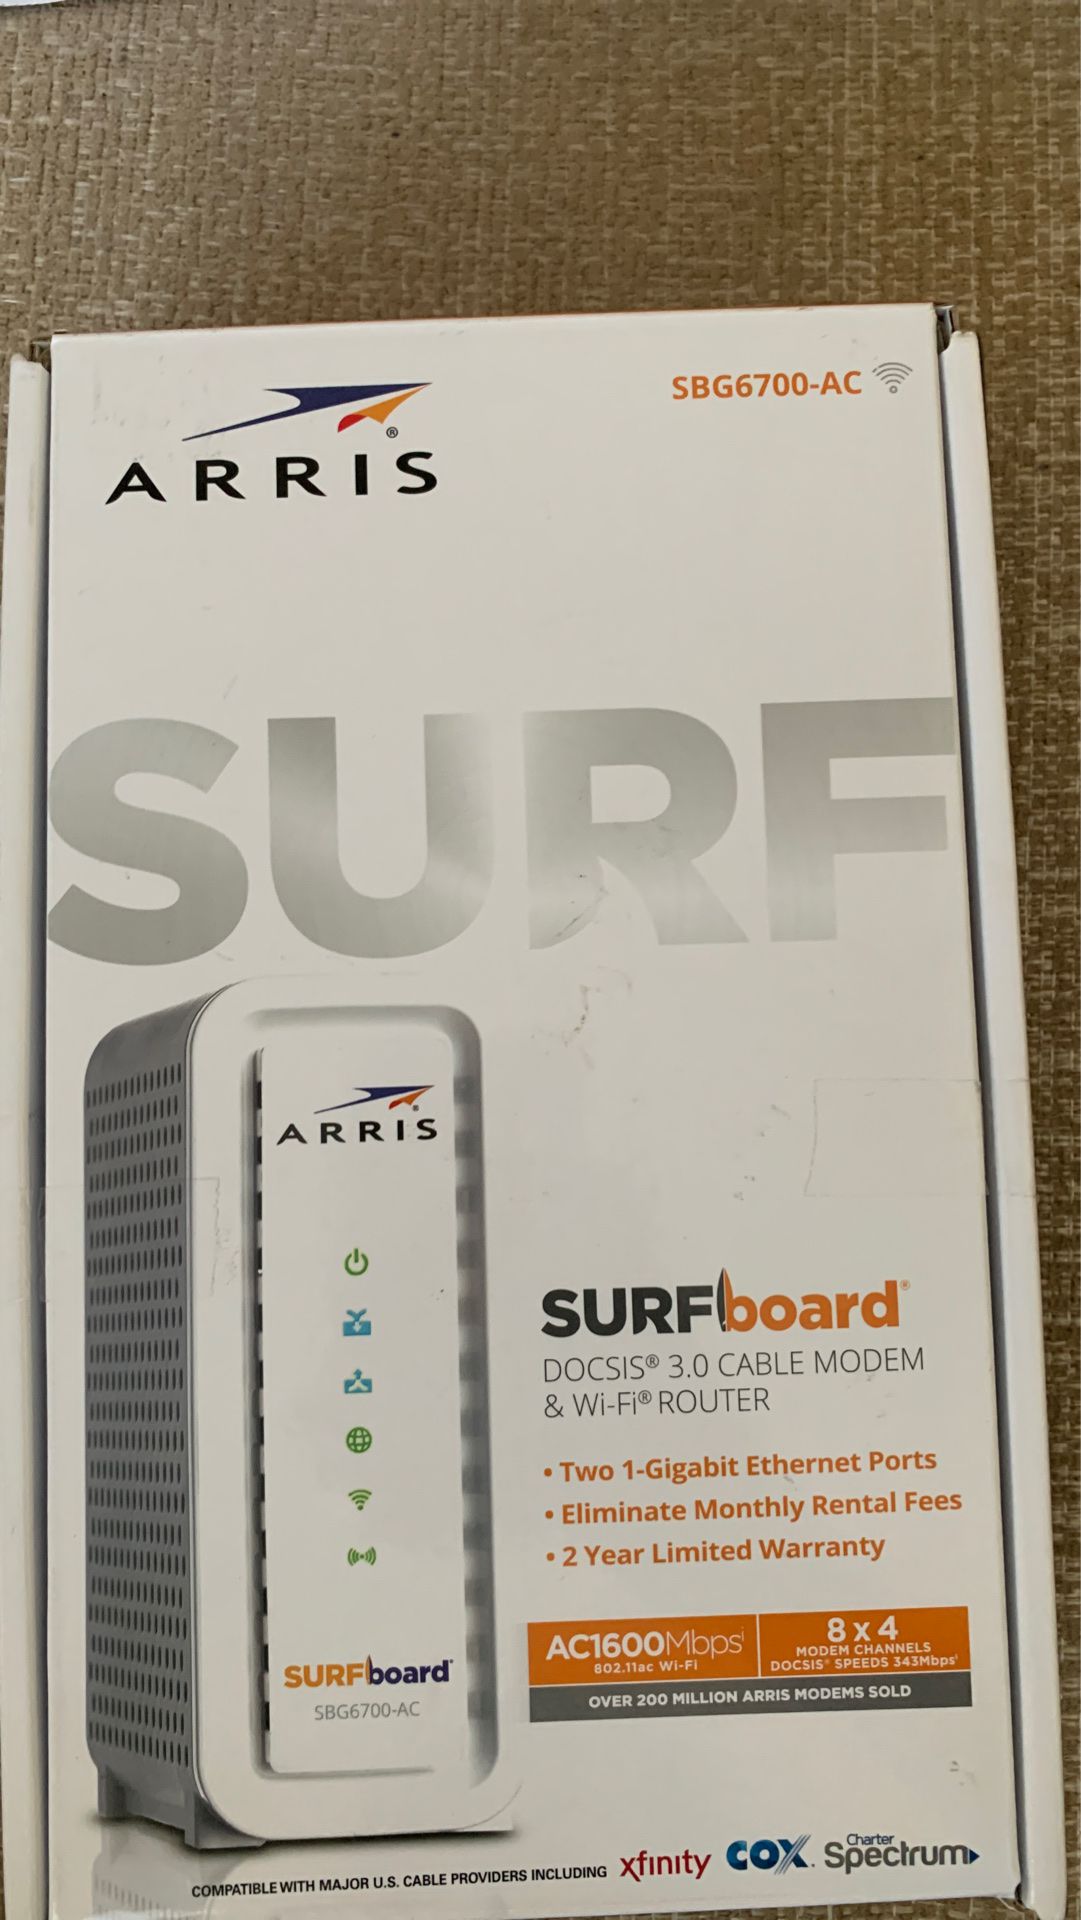 Surfboard 3.0 Cable Modem & Wi-Fi Router